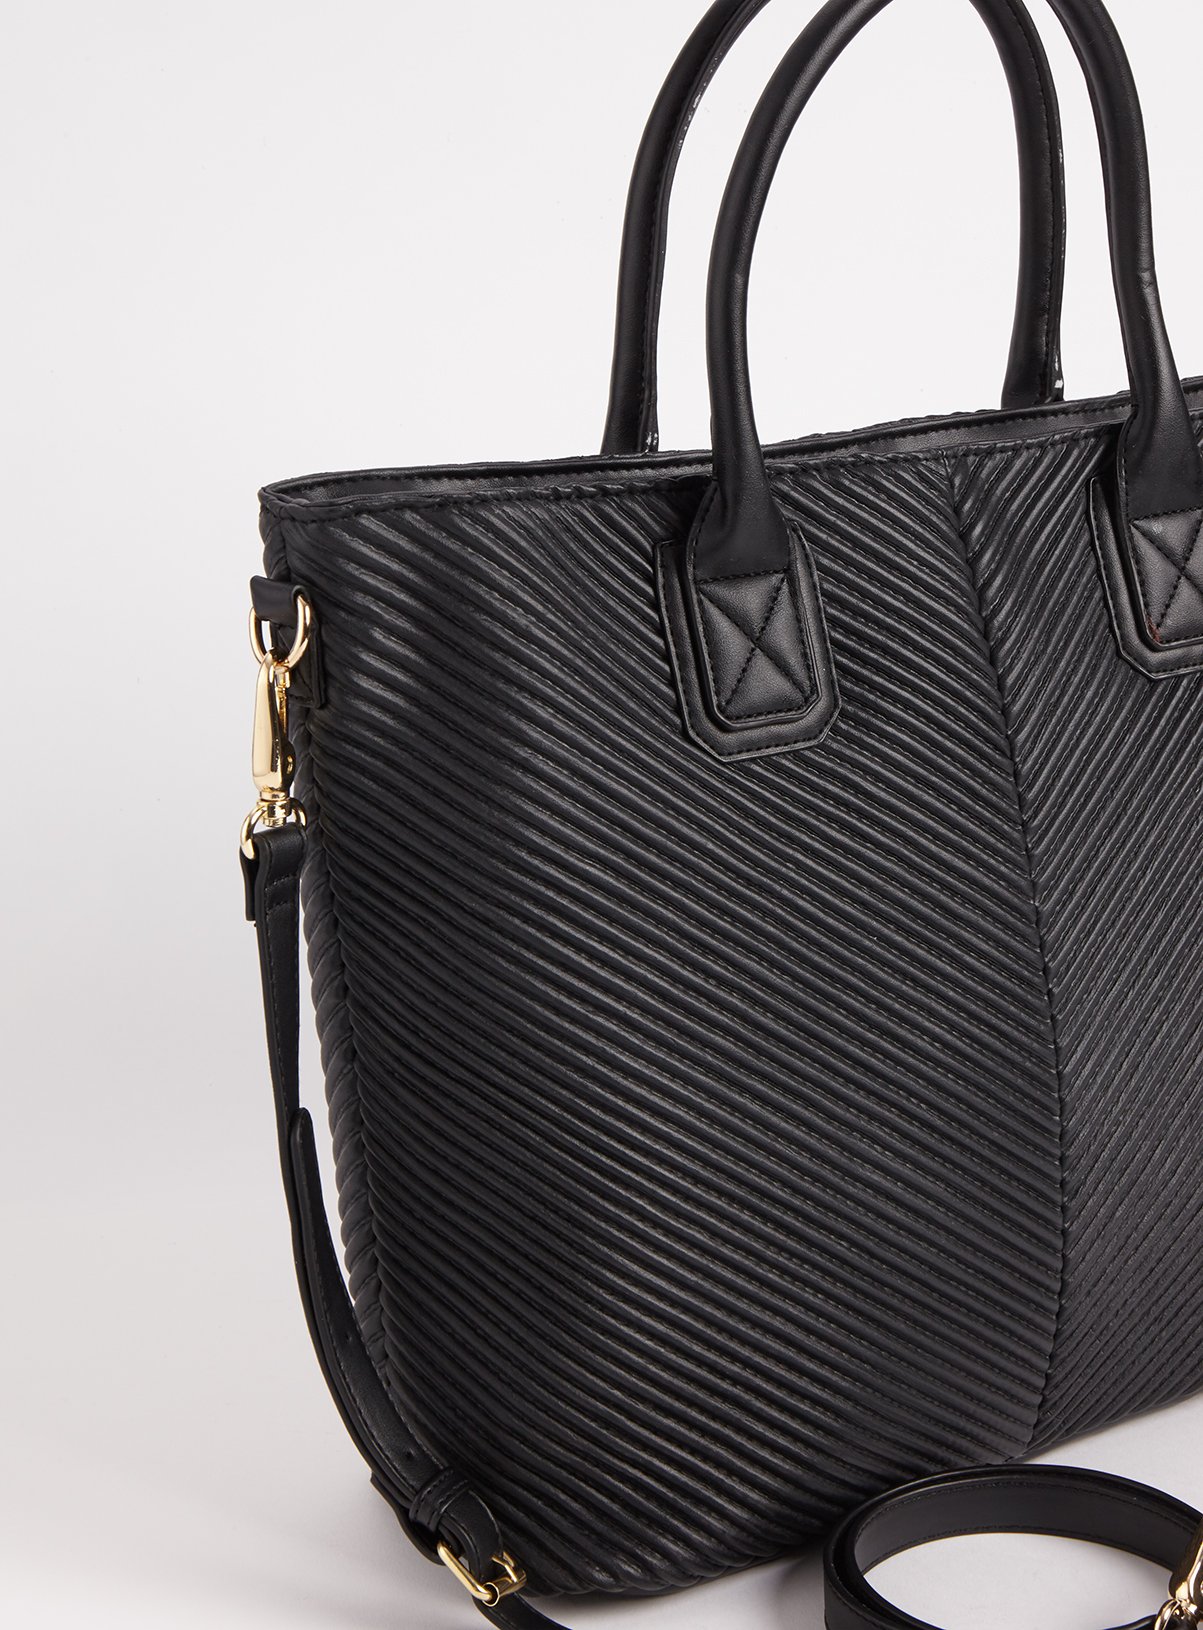 Black Faux Leather Ribbed Shopper Bag Reviews - Updated March 2023